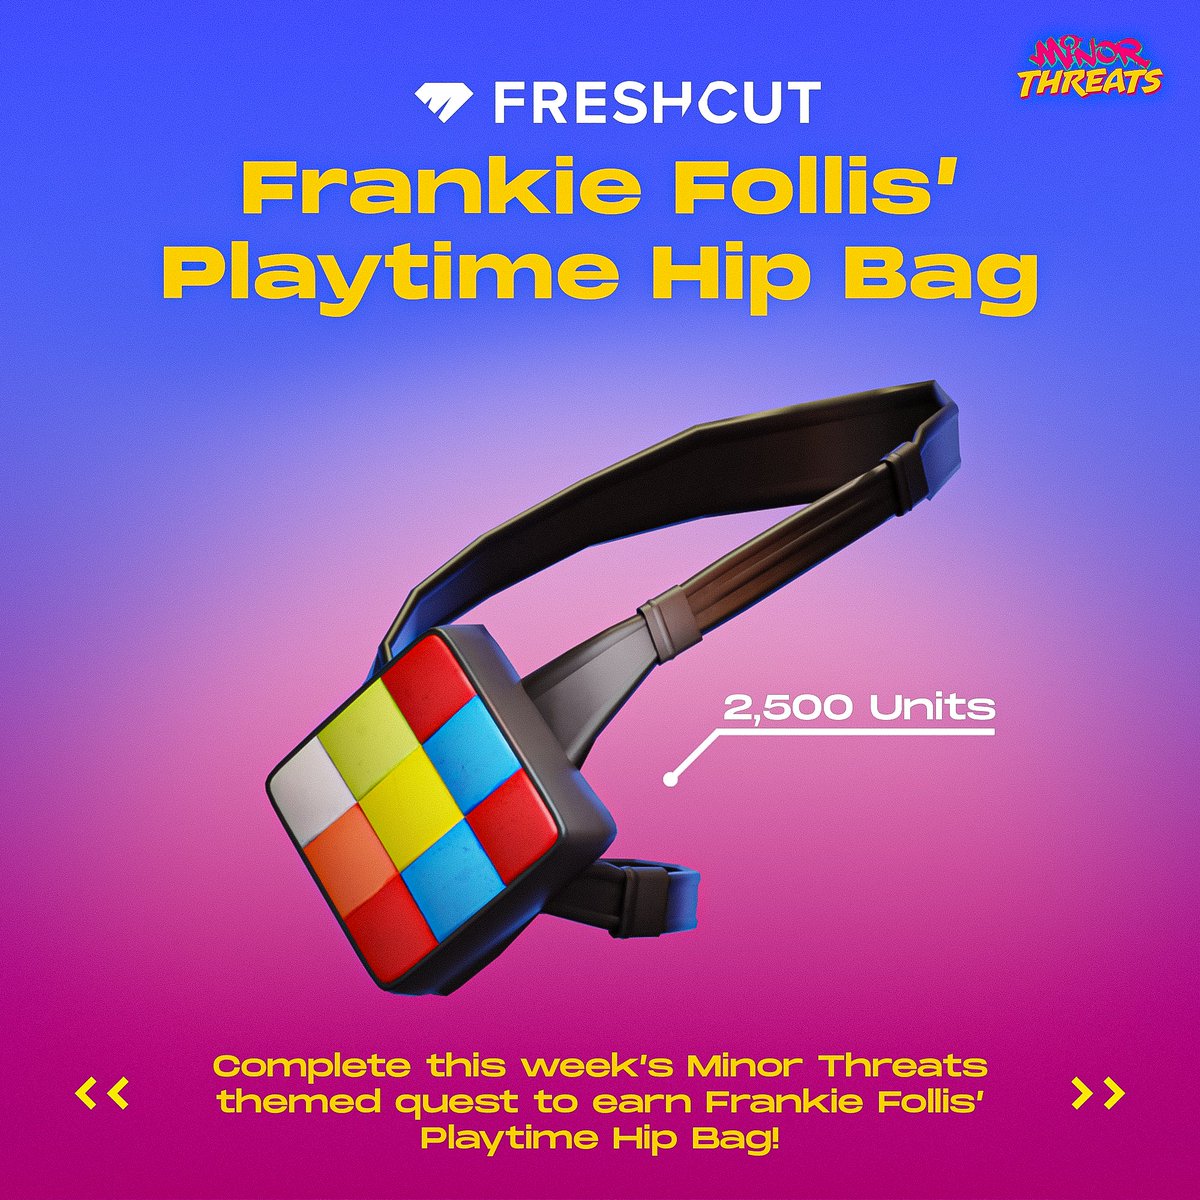 New quest alert 🚨 ICYMI every Wednesday in April, FreshCut is dropping Minor Threats themed-loot quests so you can complete the ultimate Frankie Follis UGC collection! This week, grab the Playtime Hip Bag. With @Freshcut, @pattonoswalt, and @blumjordan